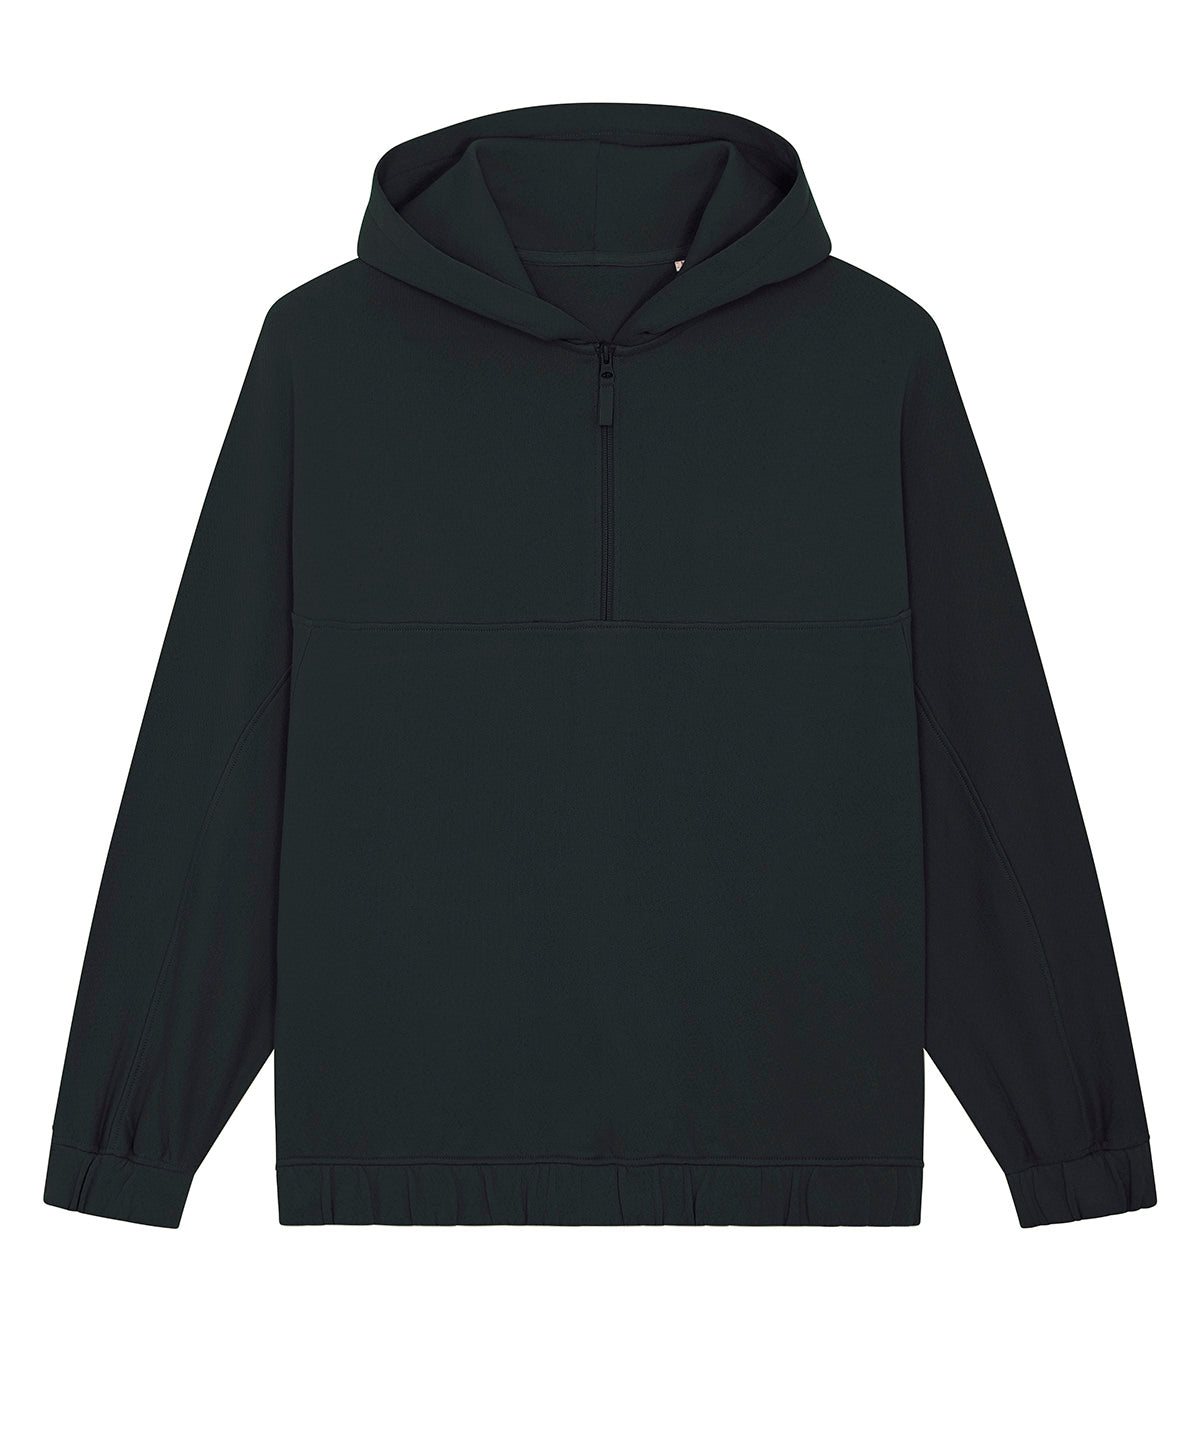 Black - Globetrotter Wave Terry unisex oversized hoodie (STSU875) Hoodies Stanley/Stella Exclusives, Home Comforts, Hoodies, New Styles For 2022, Organic & Conscious, Raladeal - Stanley Stella, Stanley/ Stella, Streetwear Schoolwear Centres